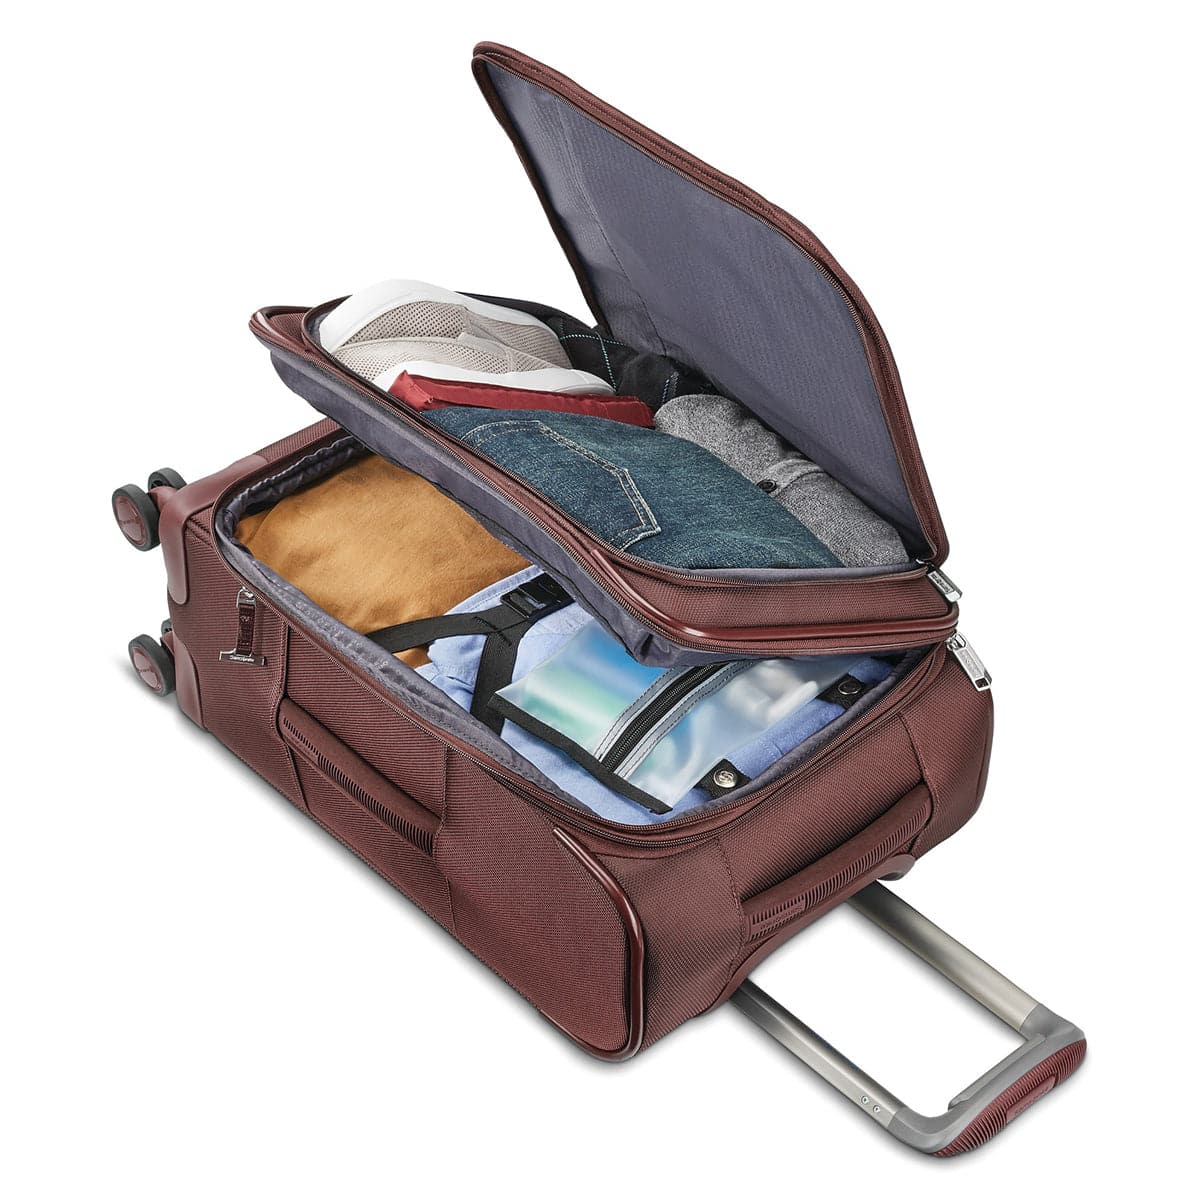 Samsonite Insignis Carry On Expandable Spinner